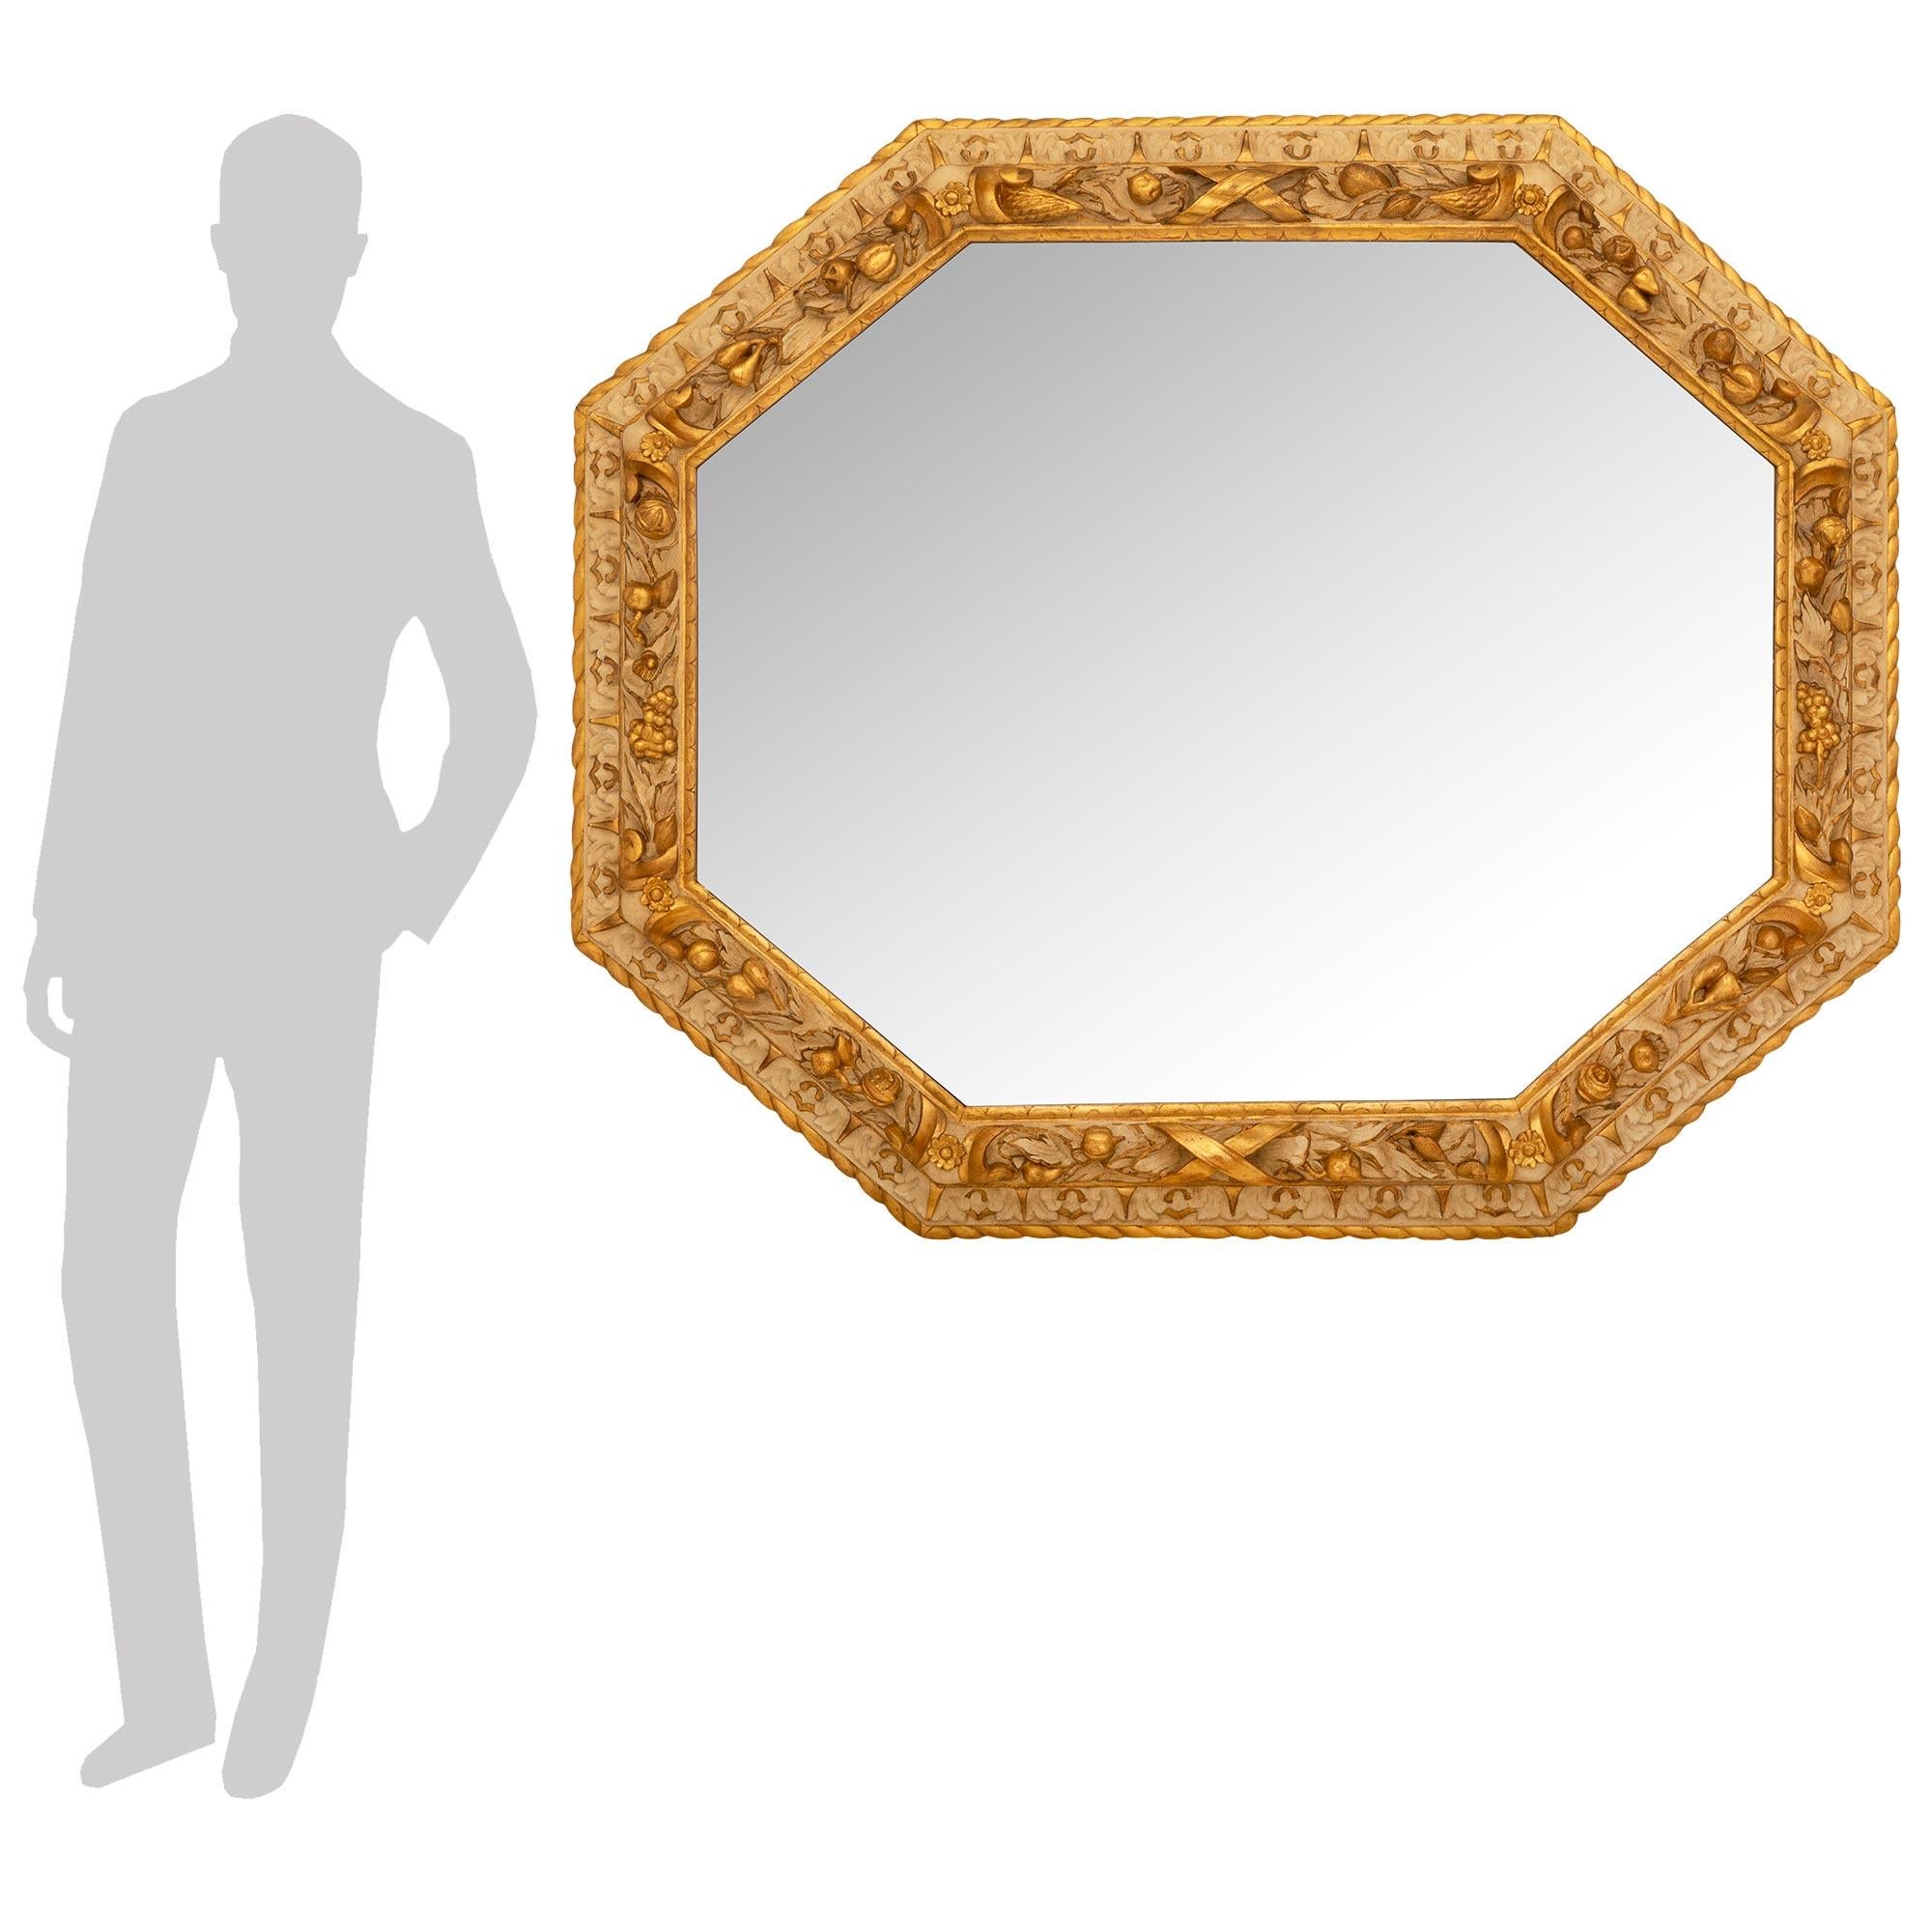 A richly carved and most elegant Italian 19th century Baroque st. Giltwood and patinated wood mirror. This gorgeous hexagonal mirror is set within a most unique and intricately carved patinated and Giltwood frame. The frame consist of a fine rope